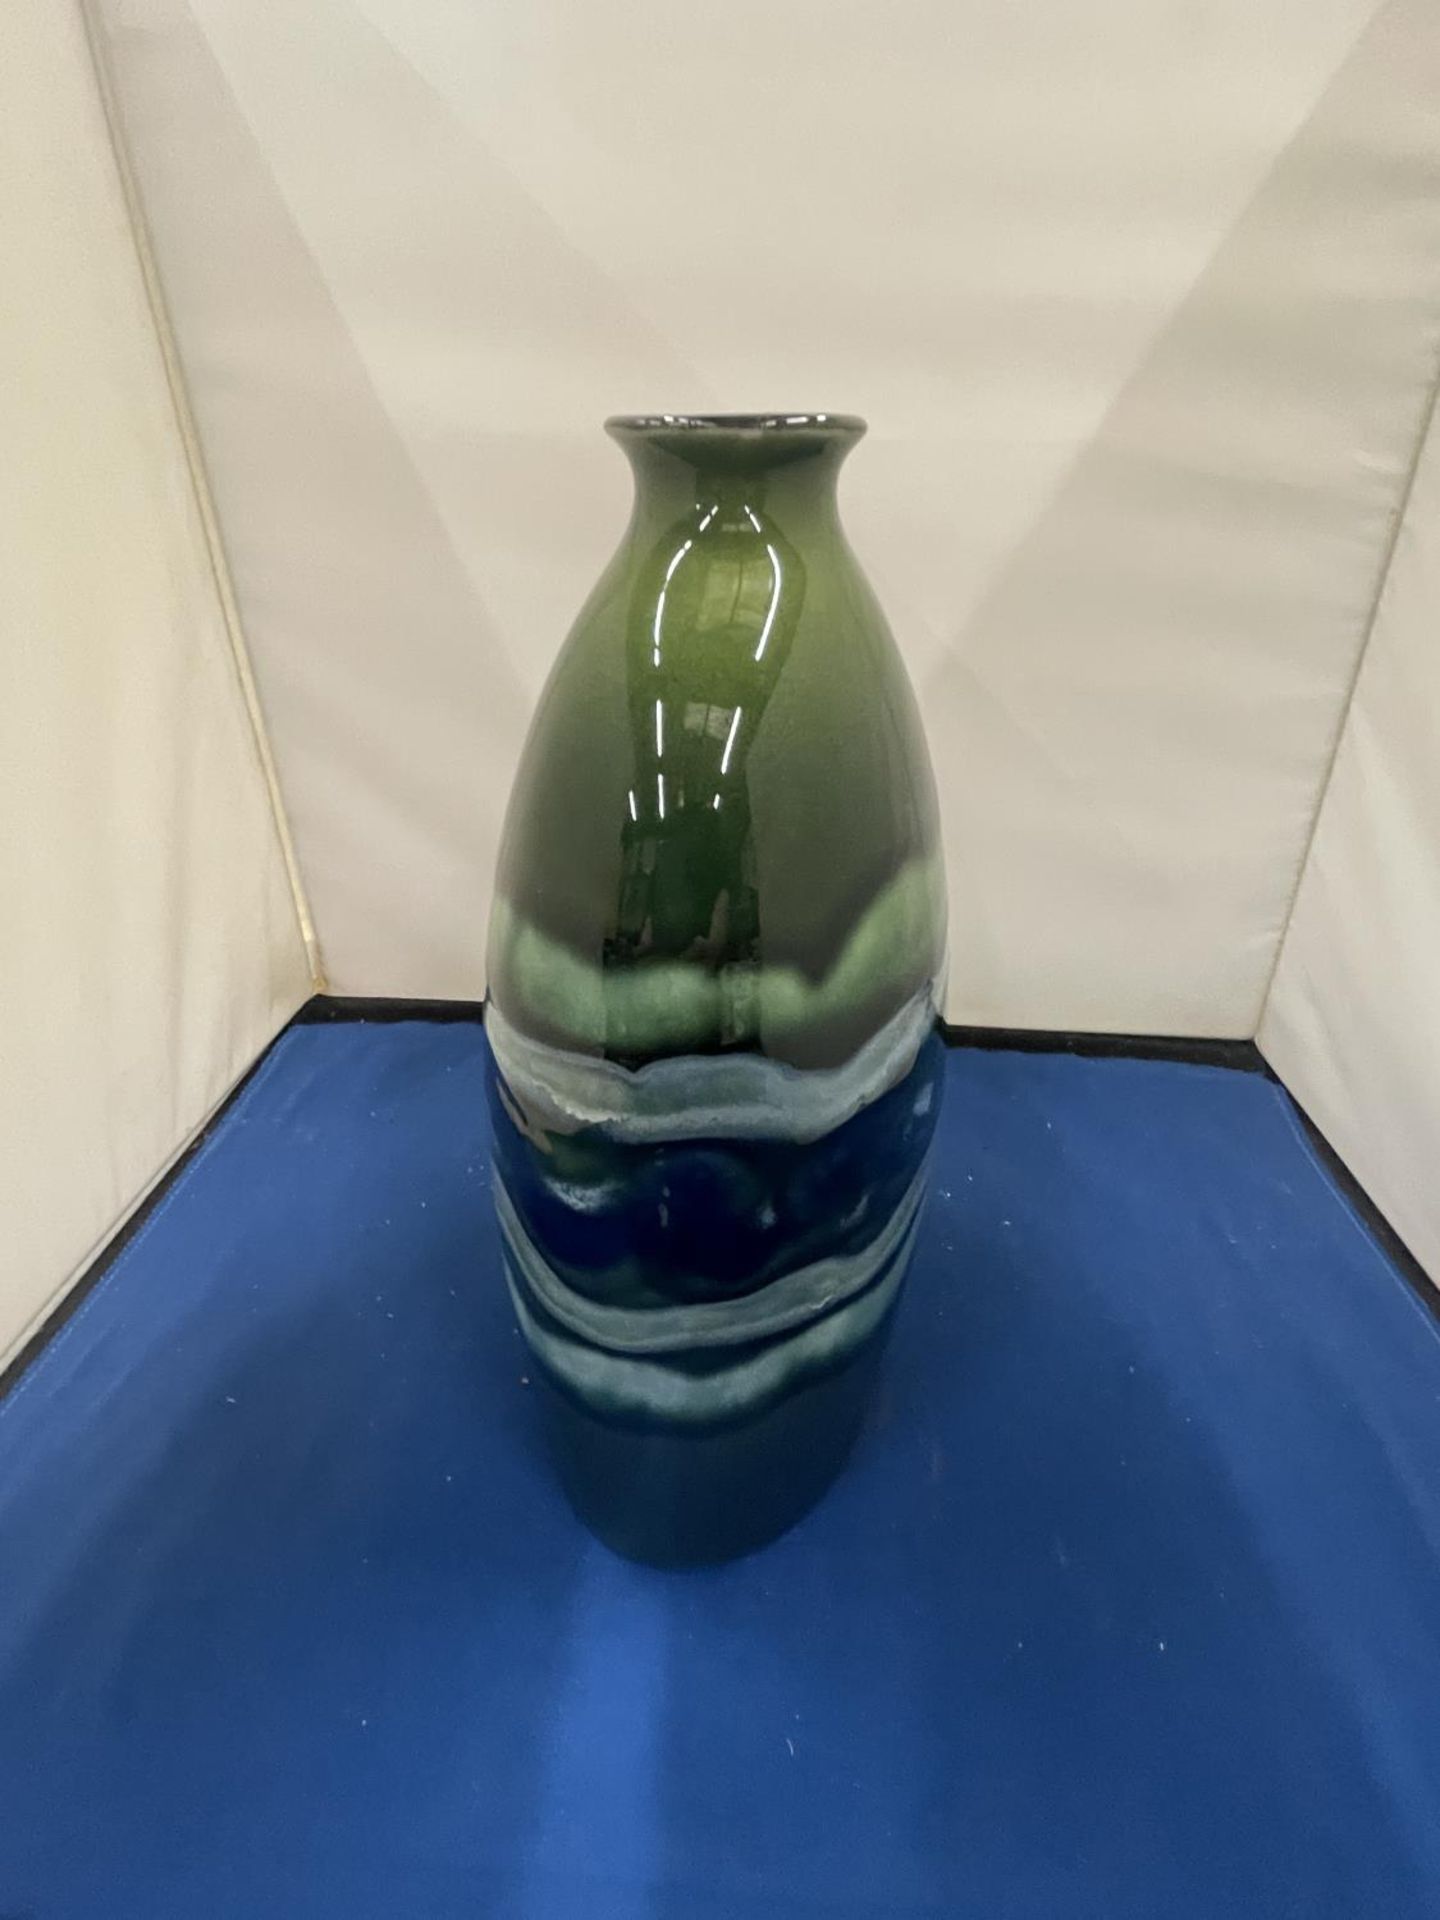 A POOLE POTTERY BOTTLE VASE MAYA DESIGN WITH ORIGINAL BOX 23CM TALL - Image 5 of 12